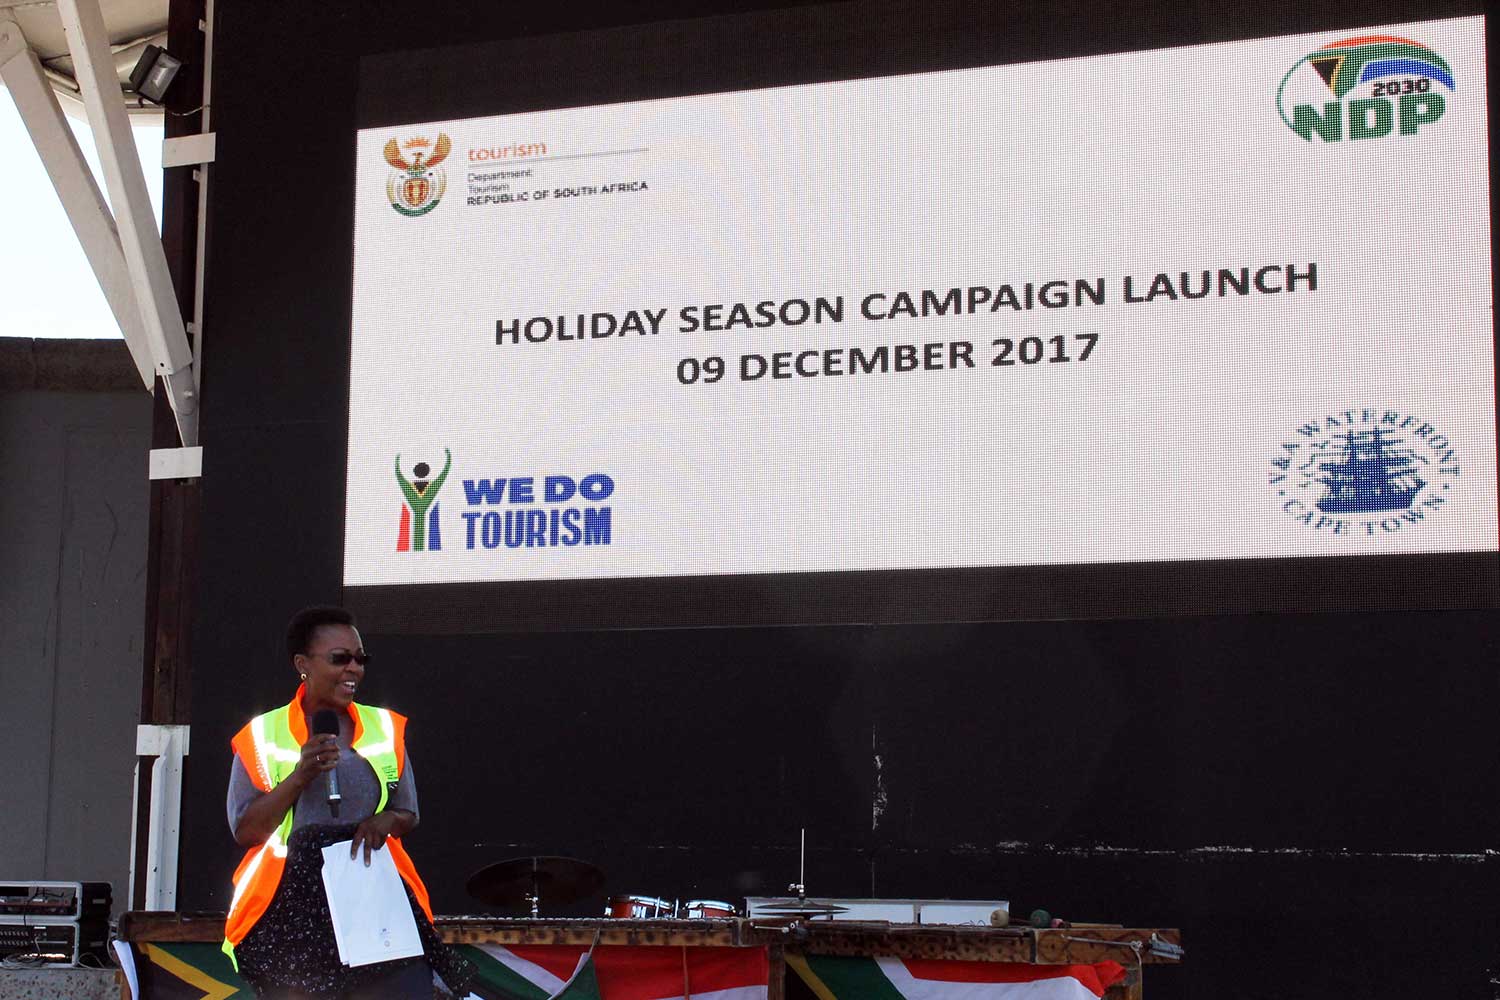 Tourists urged to do tourism safely and responsibly this holiday season